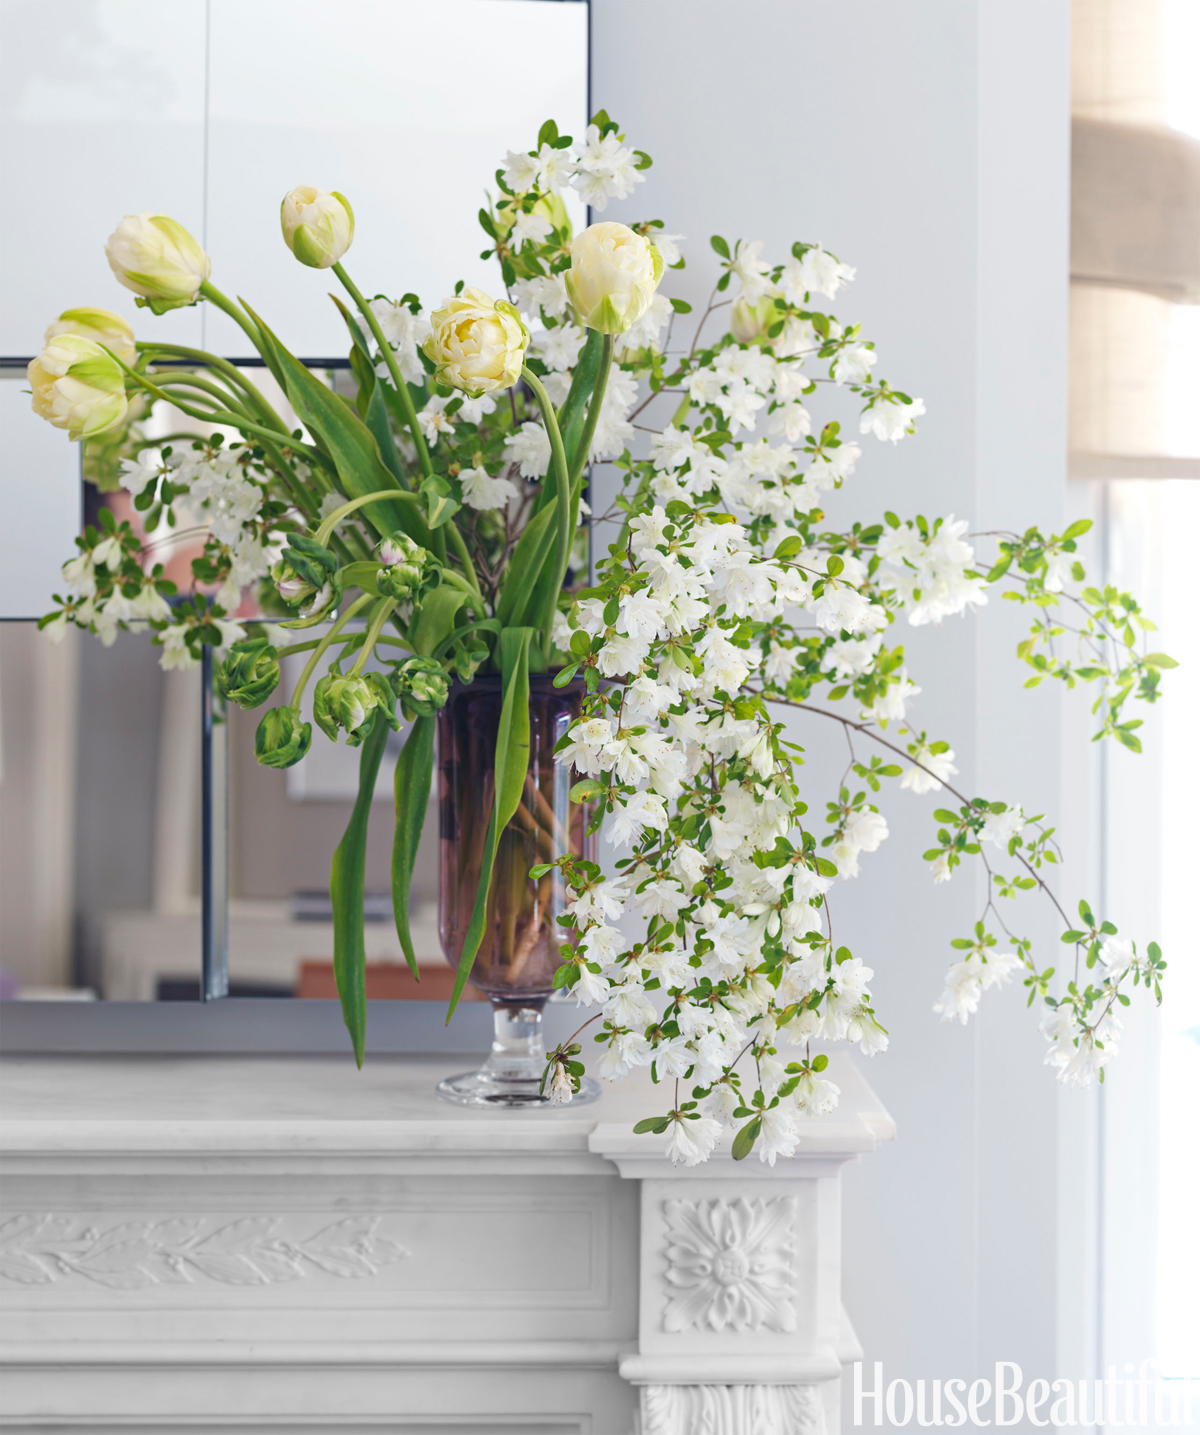 10 Creative Ways to Add Spring Flowers to Your Home Design